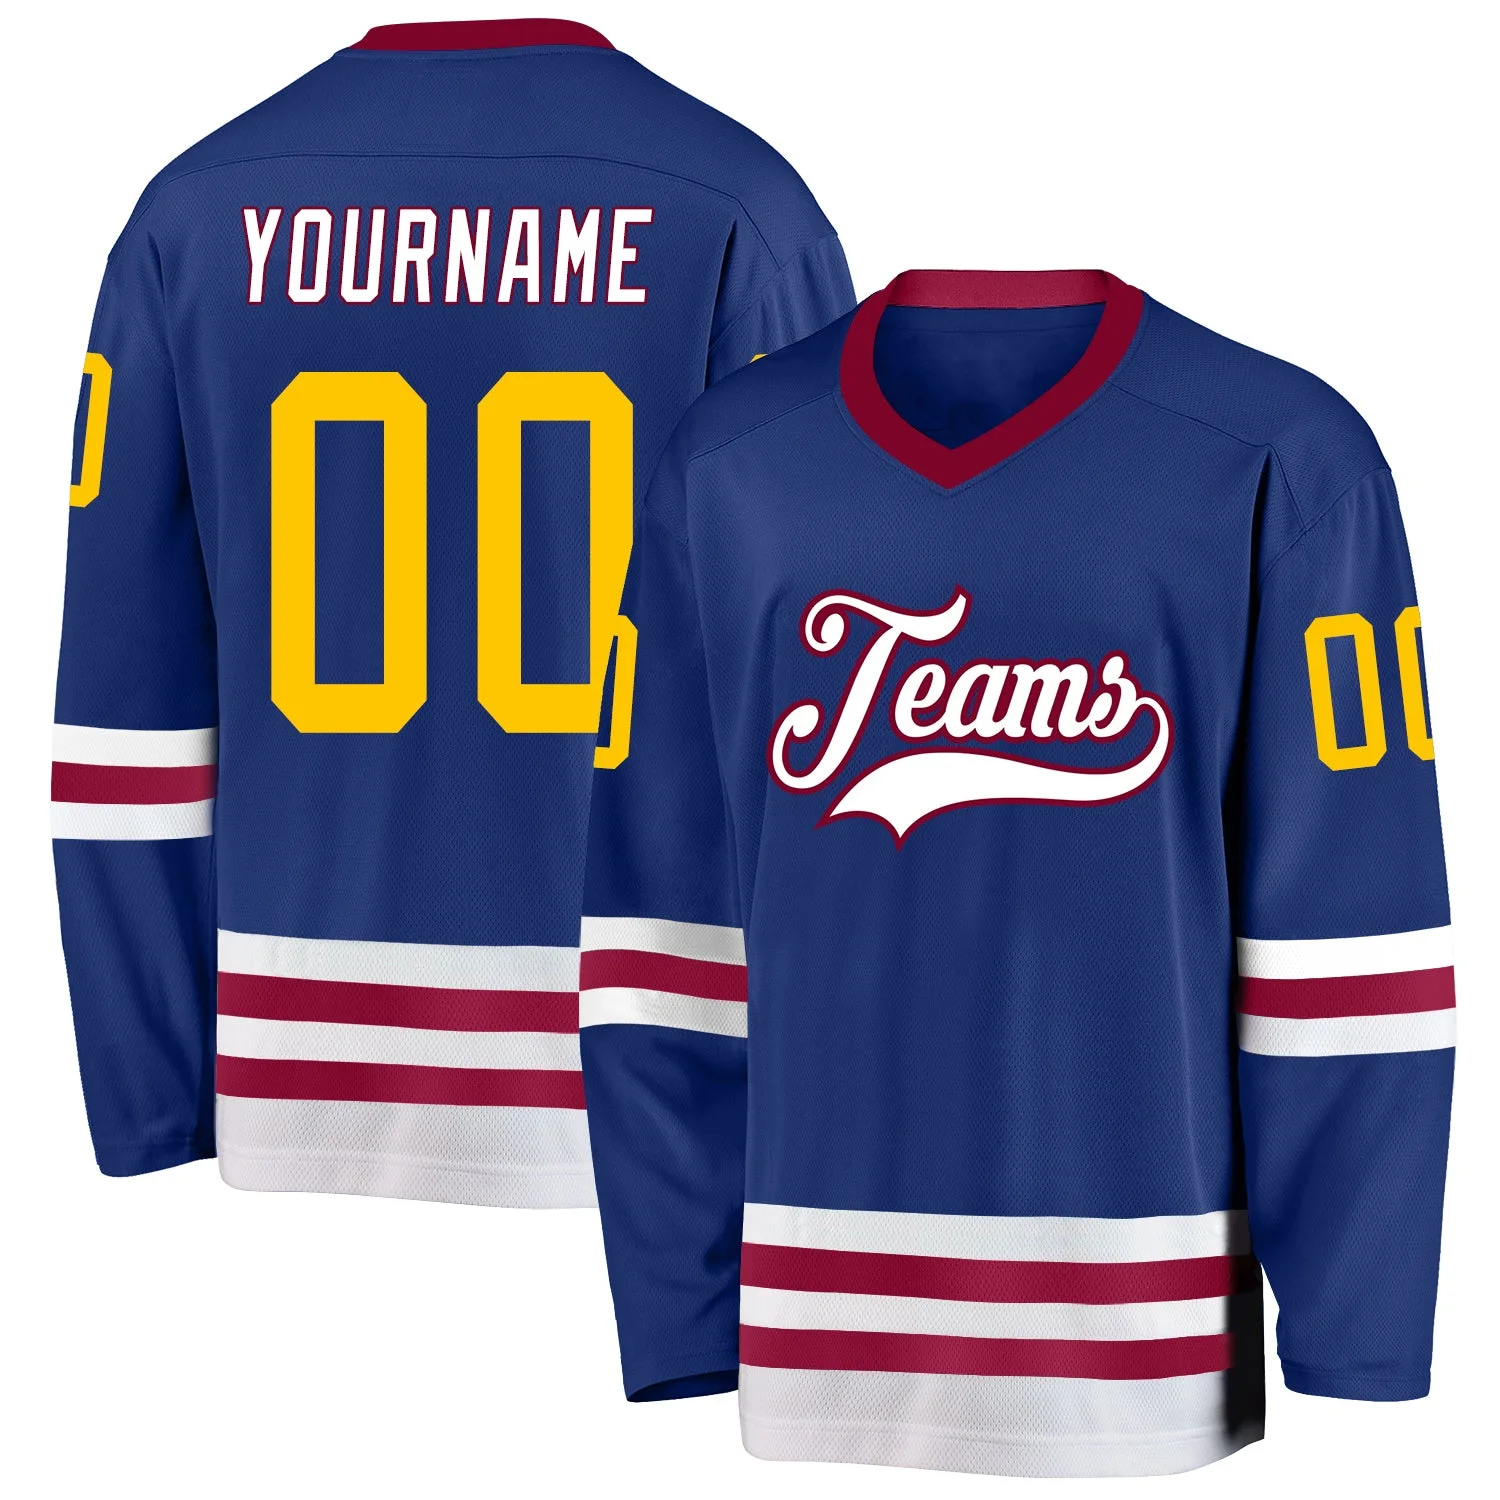 Stitched And Print Royal Gold-maroon Hockey Jersey Custom